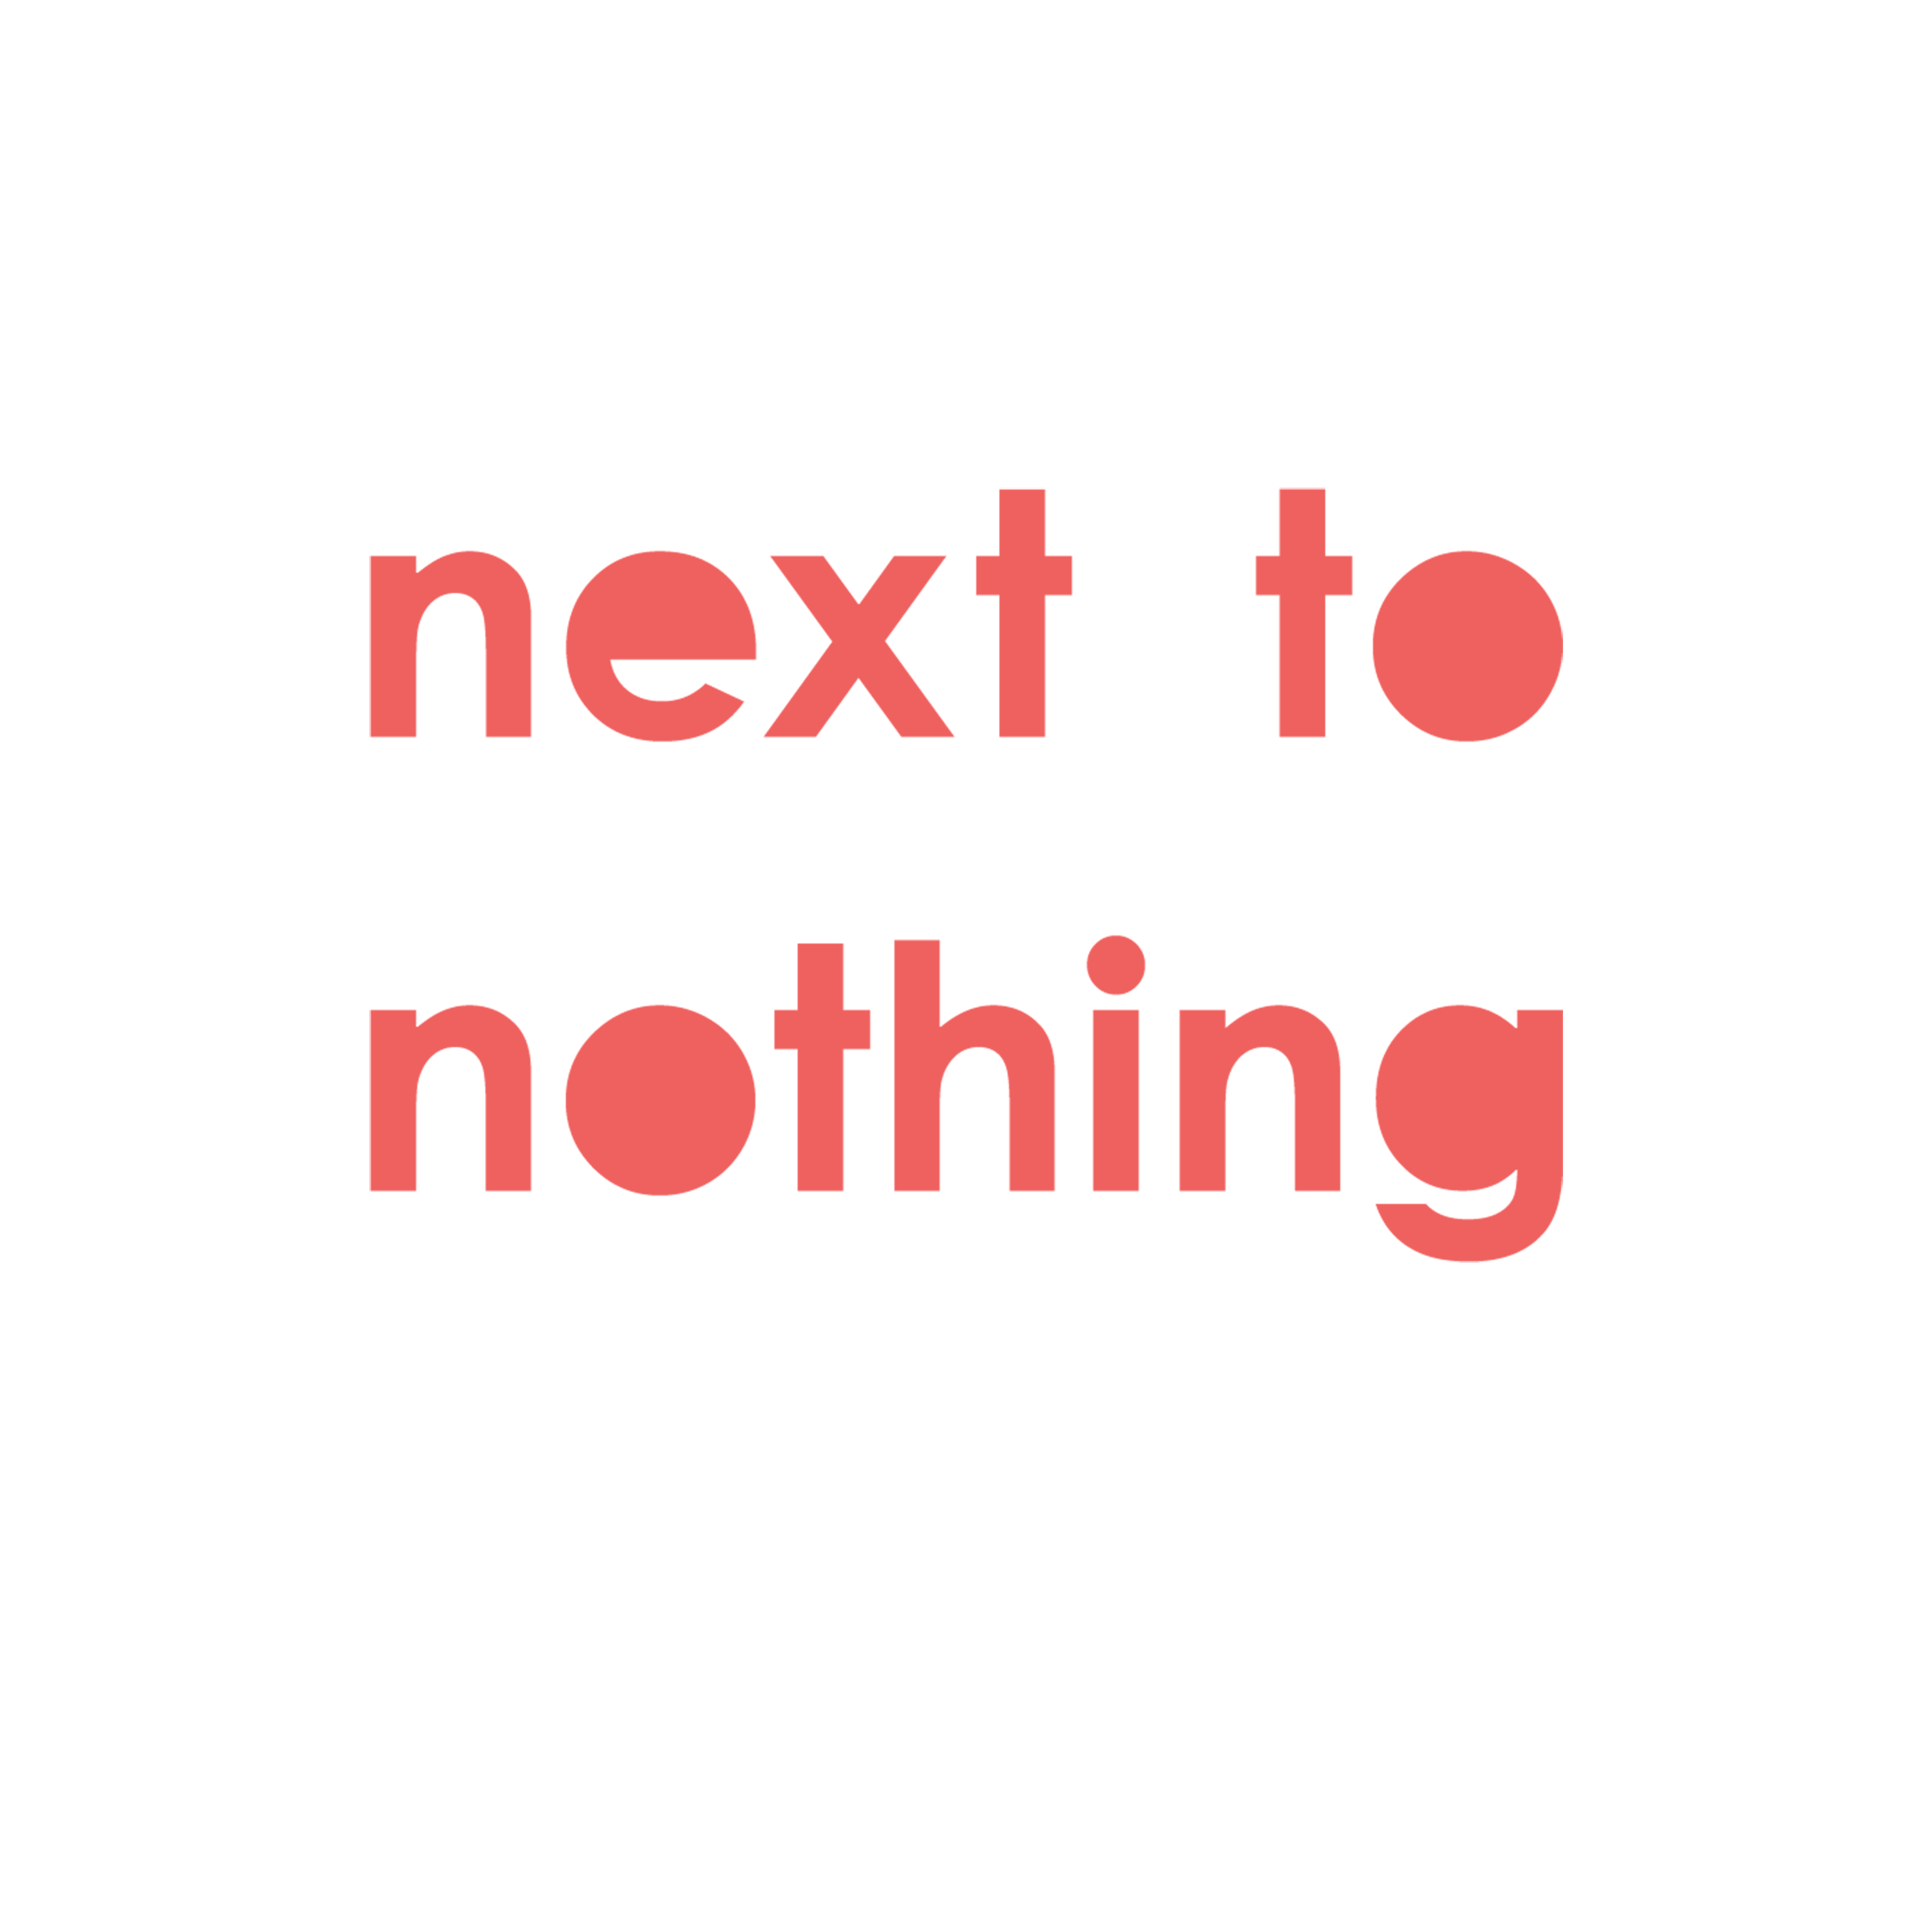 Next To Nothing by Linus Hunkeler Graphic Design Nicole Pfister